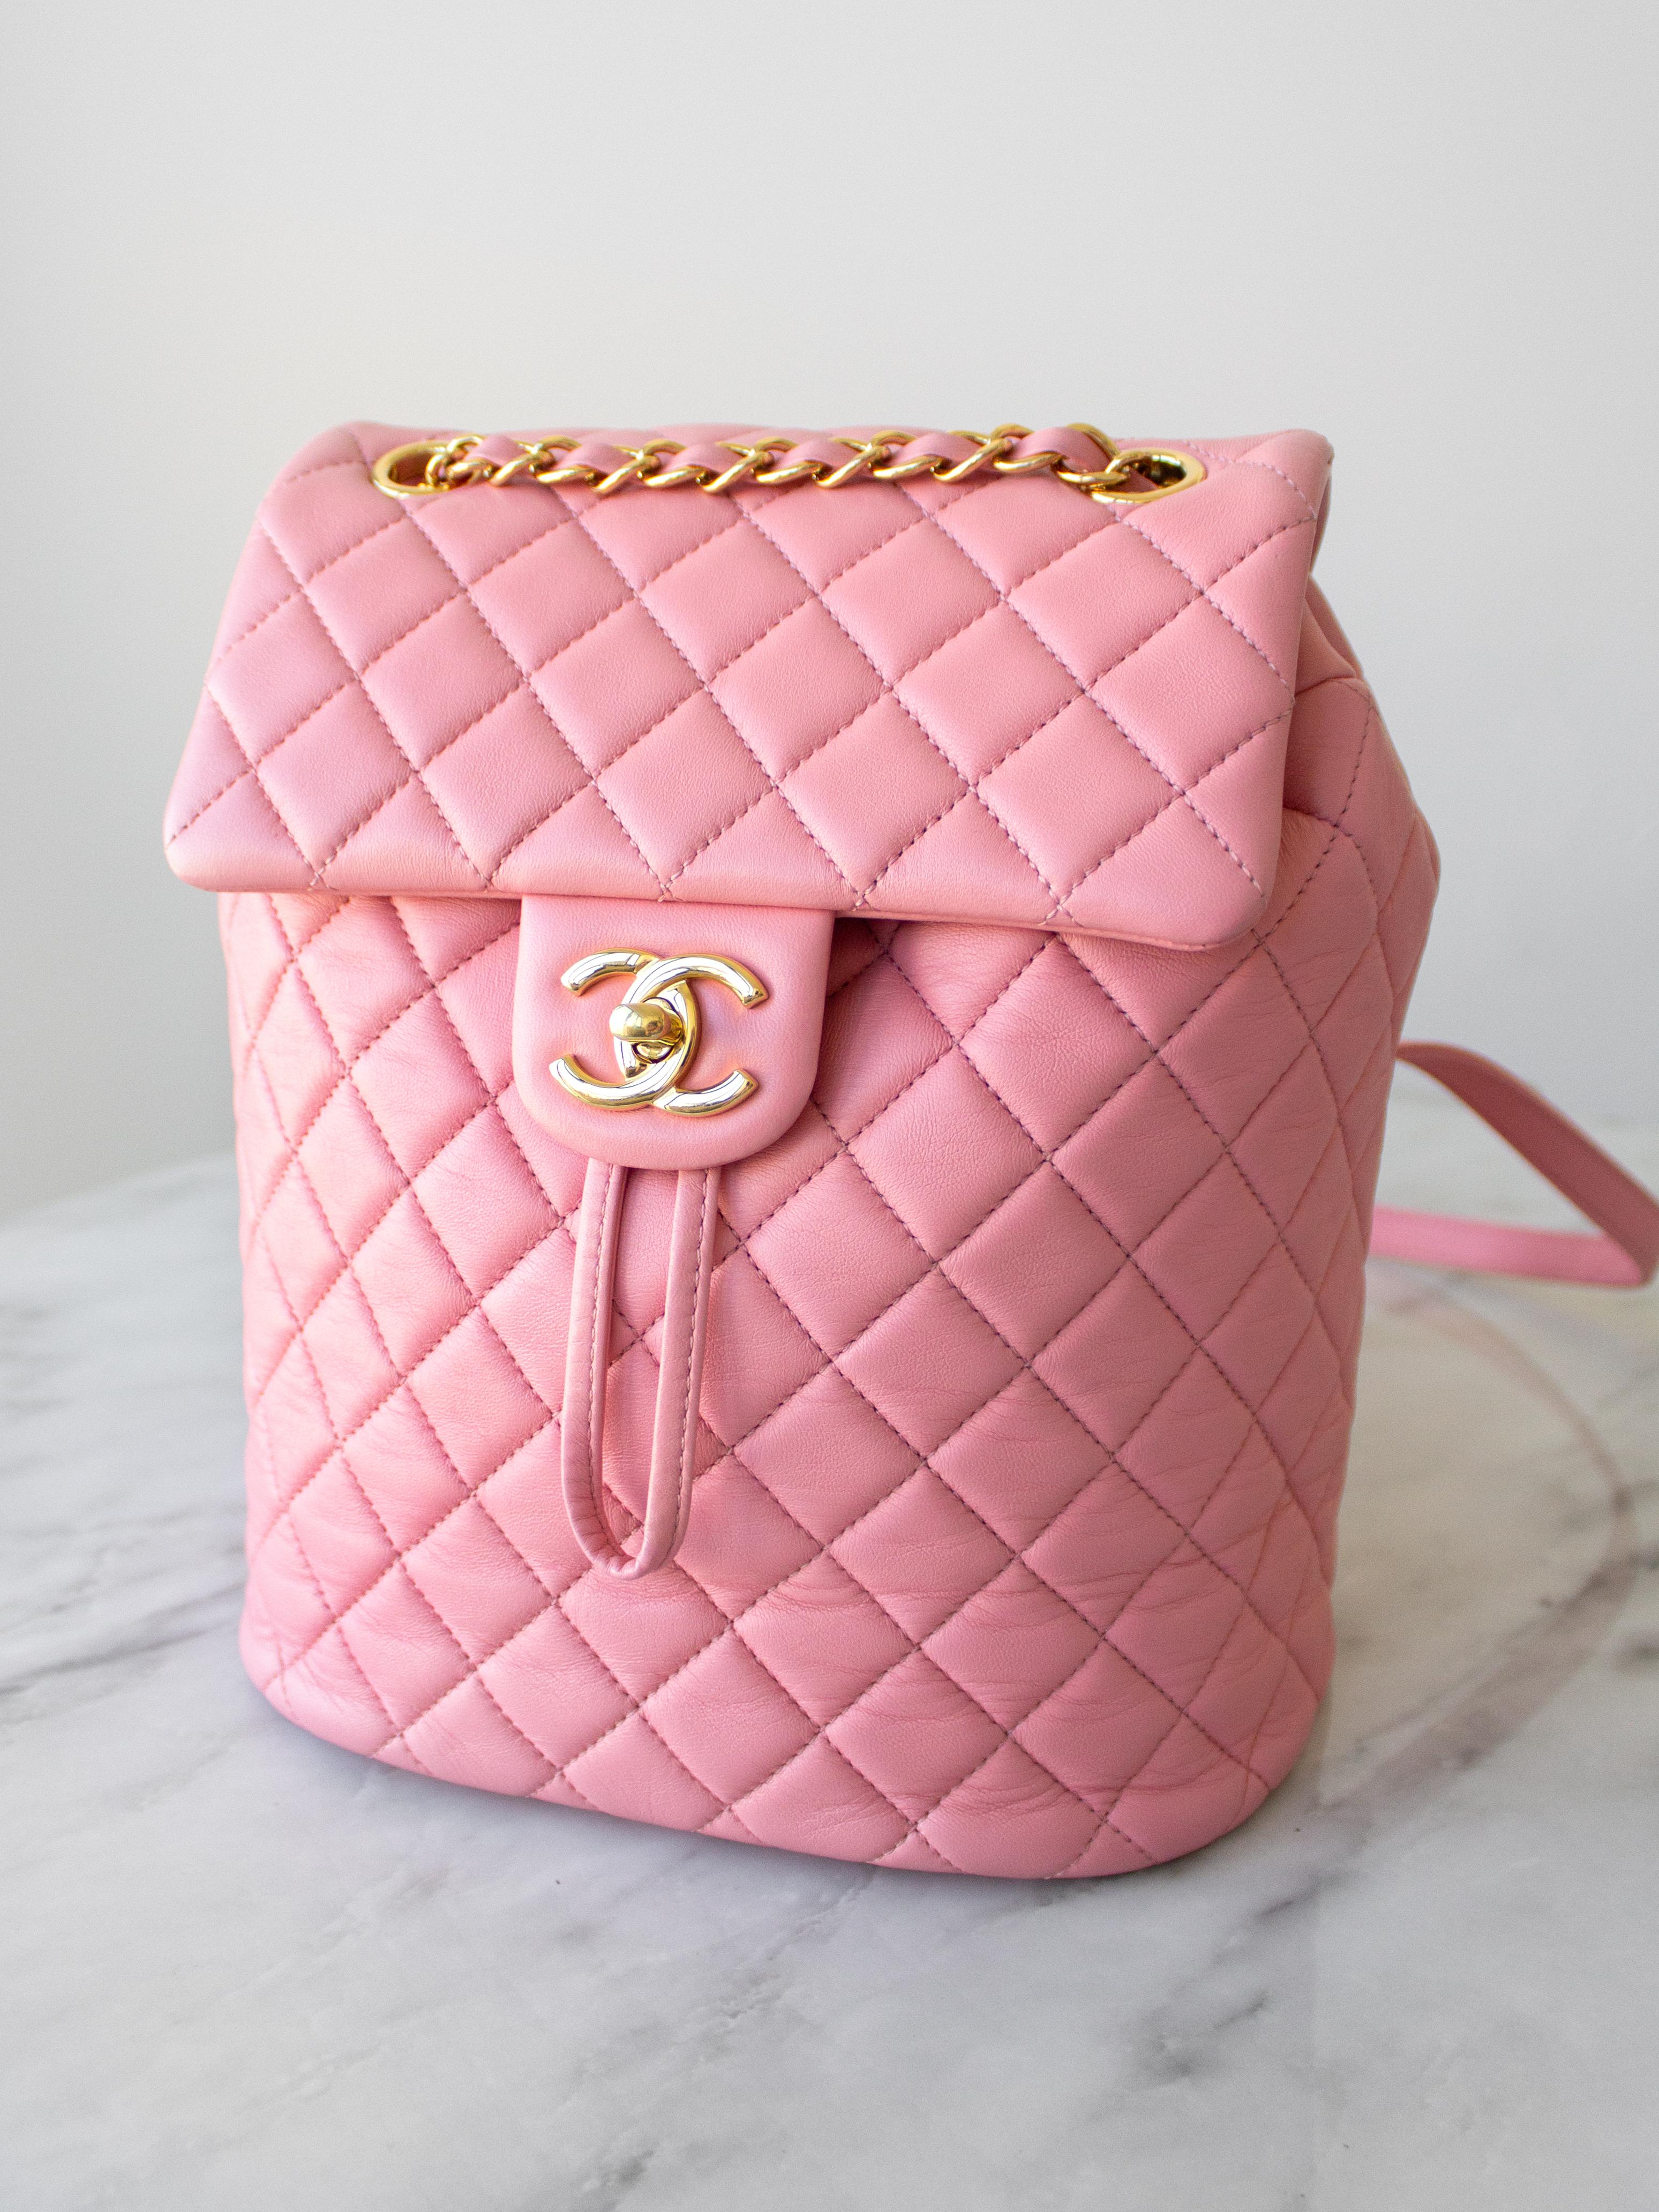 The Chanel Small Urban Spirit Backpack is a truly beautiful piece of craftsmanship. This stylish and luxe backpack is crafted from soft and smooth diamond-quilted leather in bubble gum pink color and features polished gold chain link leather